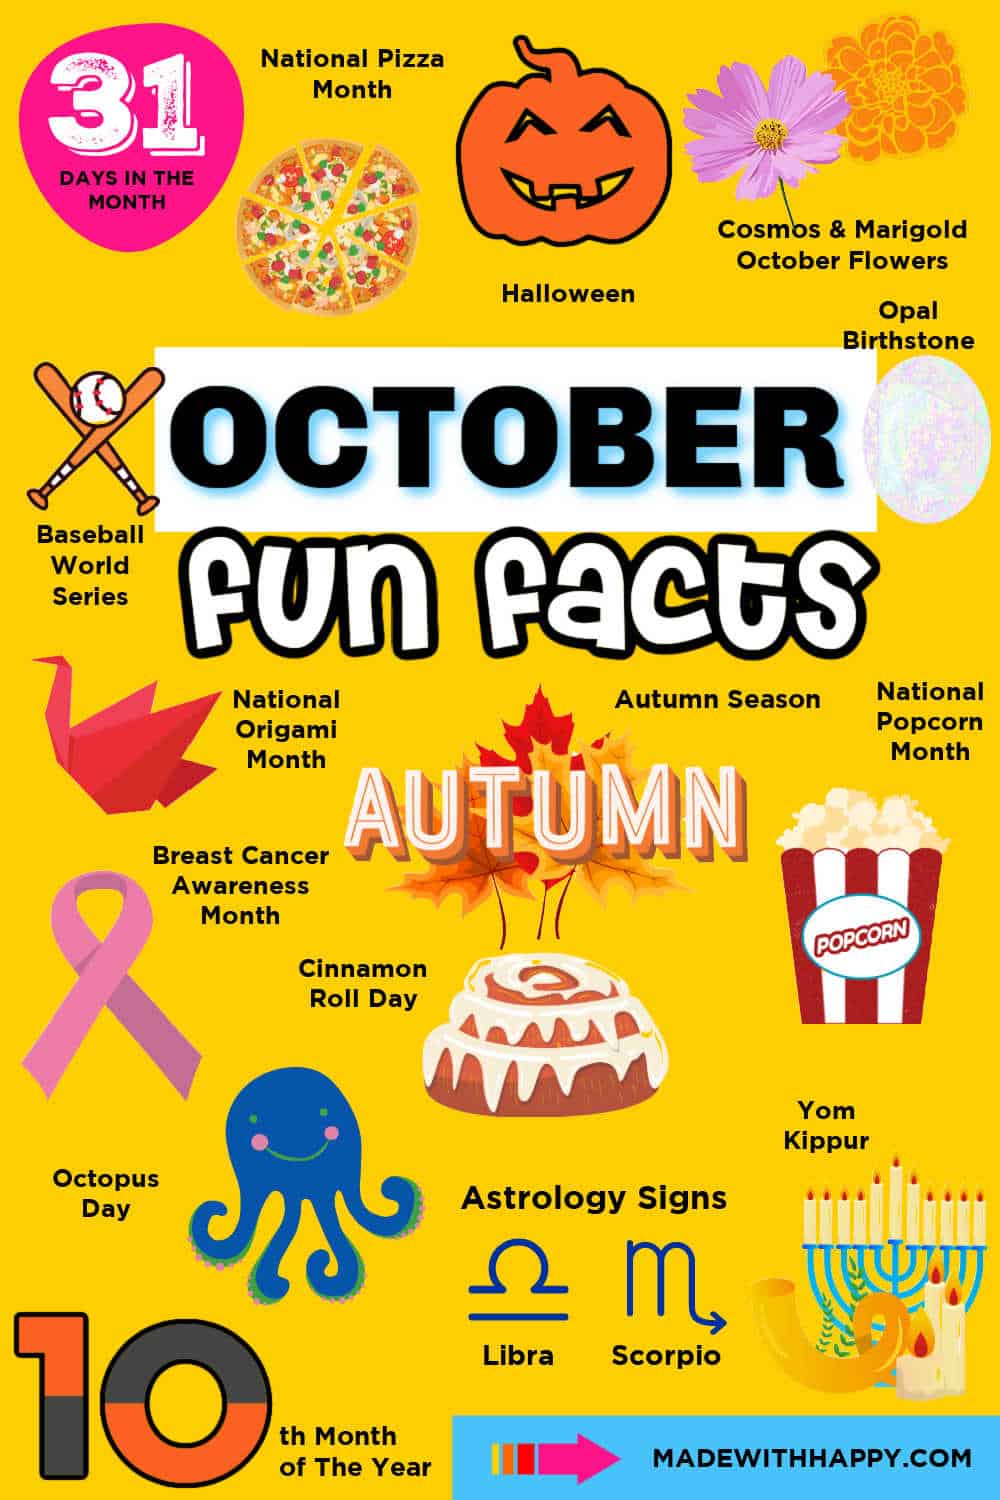 October Facts